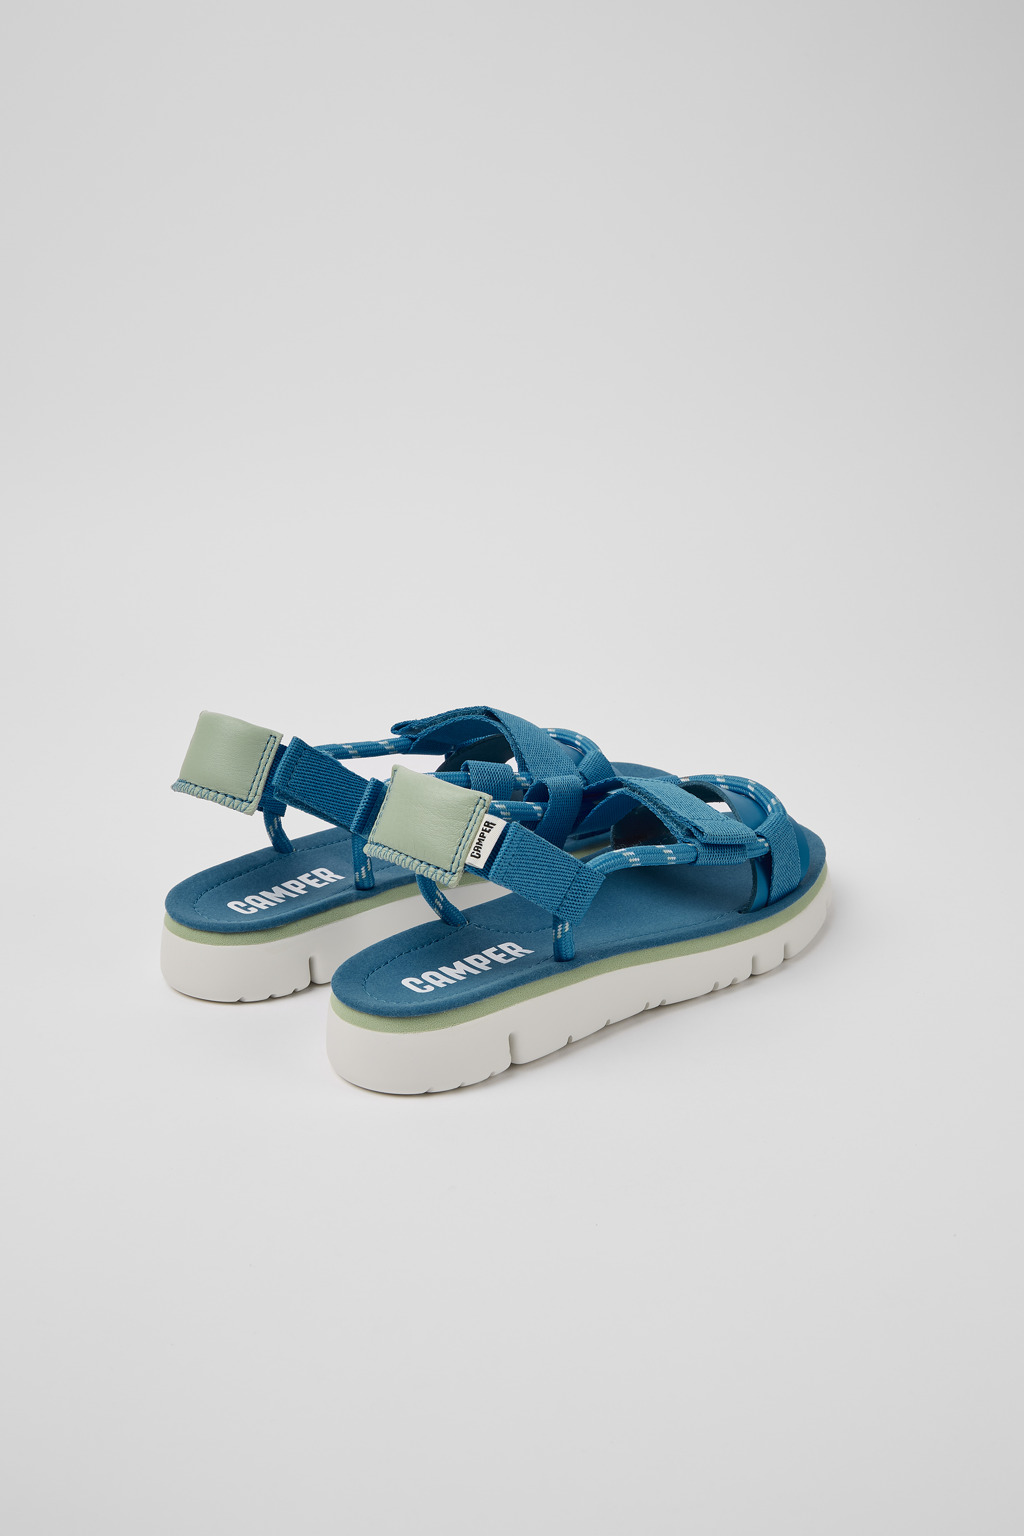 oruga Blue Sandals for Women - Fall/Winter collection - Camper USA